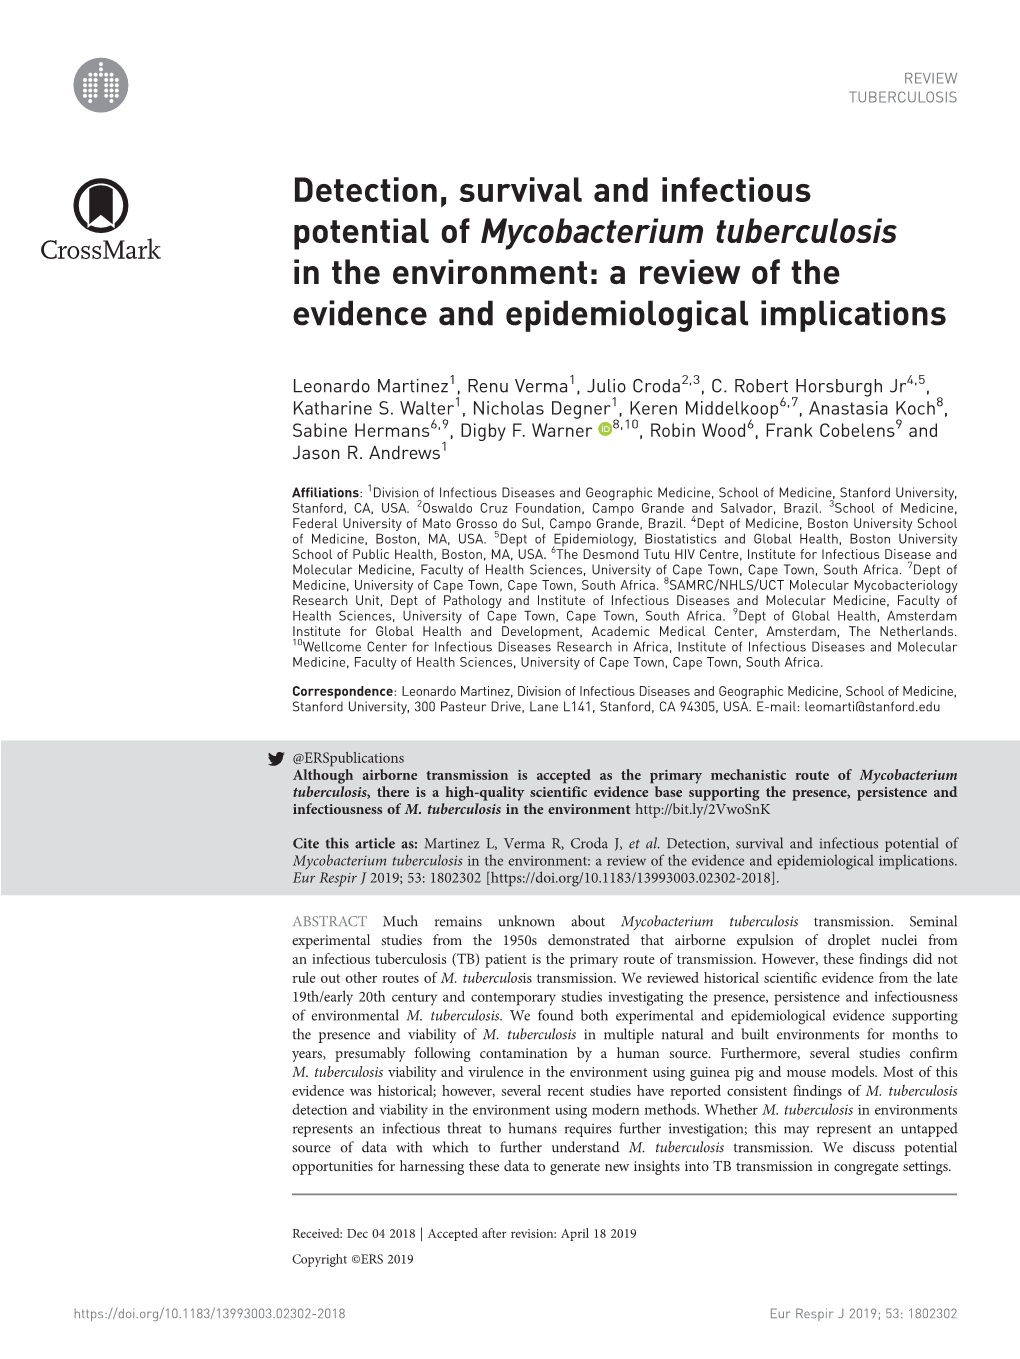 Detection, Survival and Infectious Potential of Mycobacterium Tuberculosis in the Environment: a Review of the Evidence and Epidemiological Implications